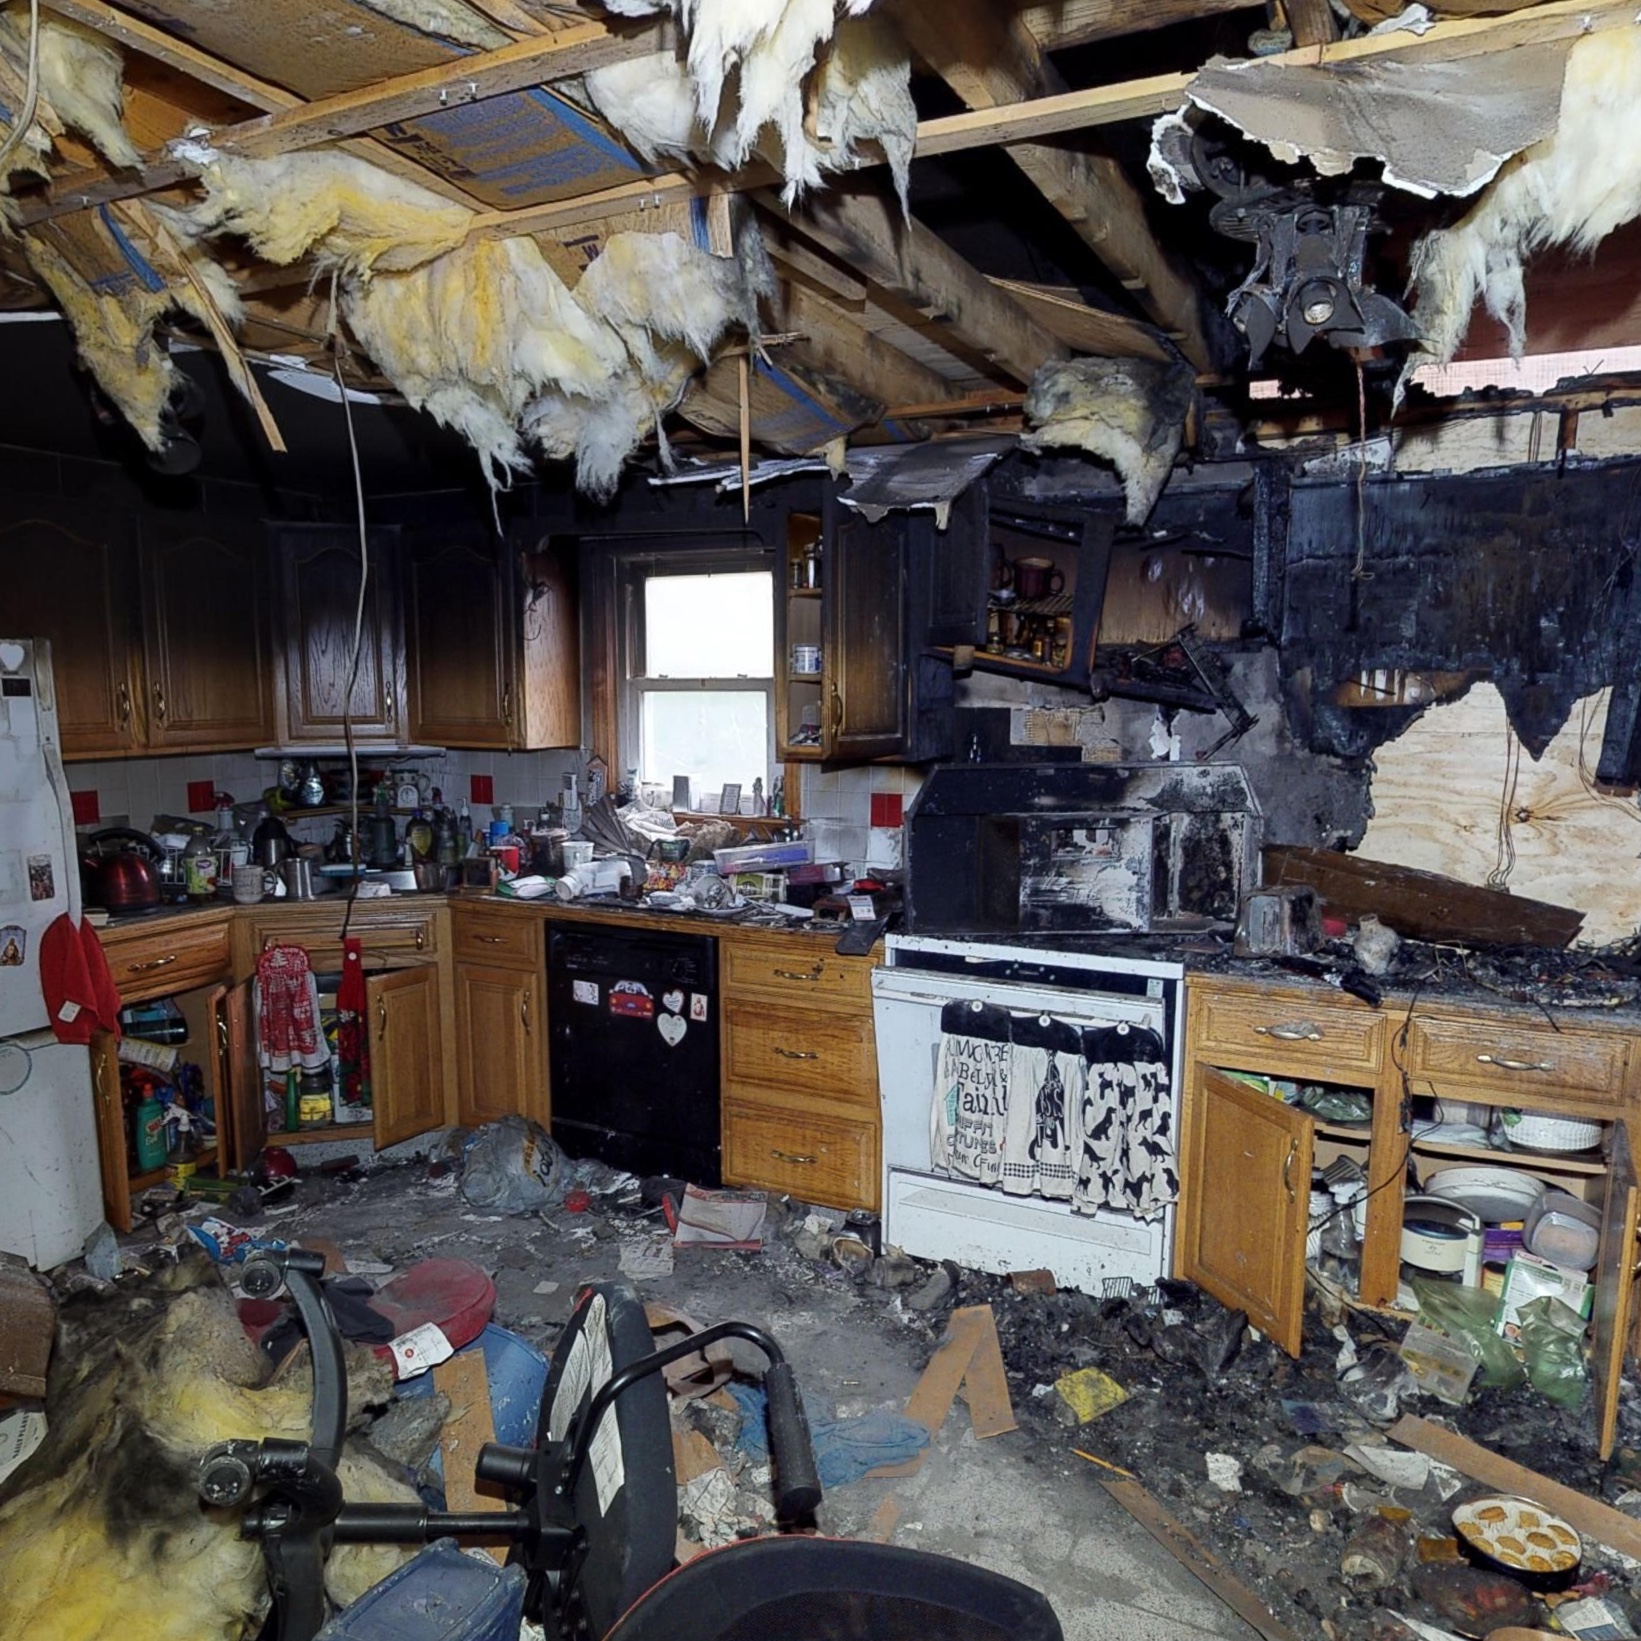 Extreme floor to ceiling property damage fills a residential kitchen